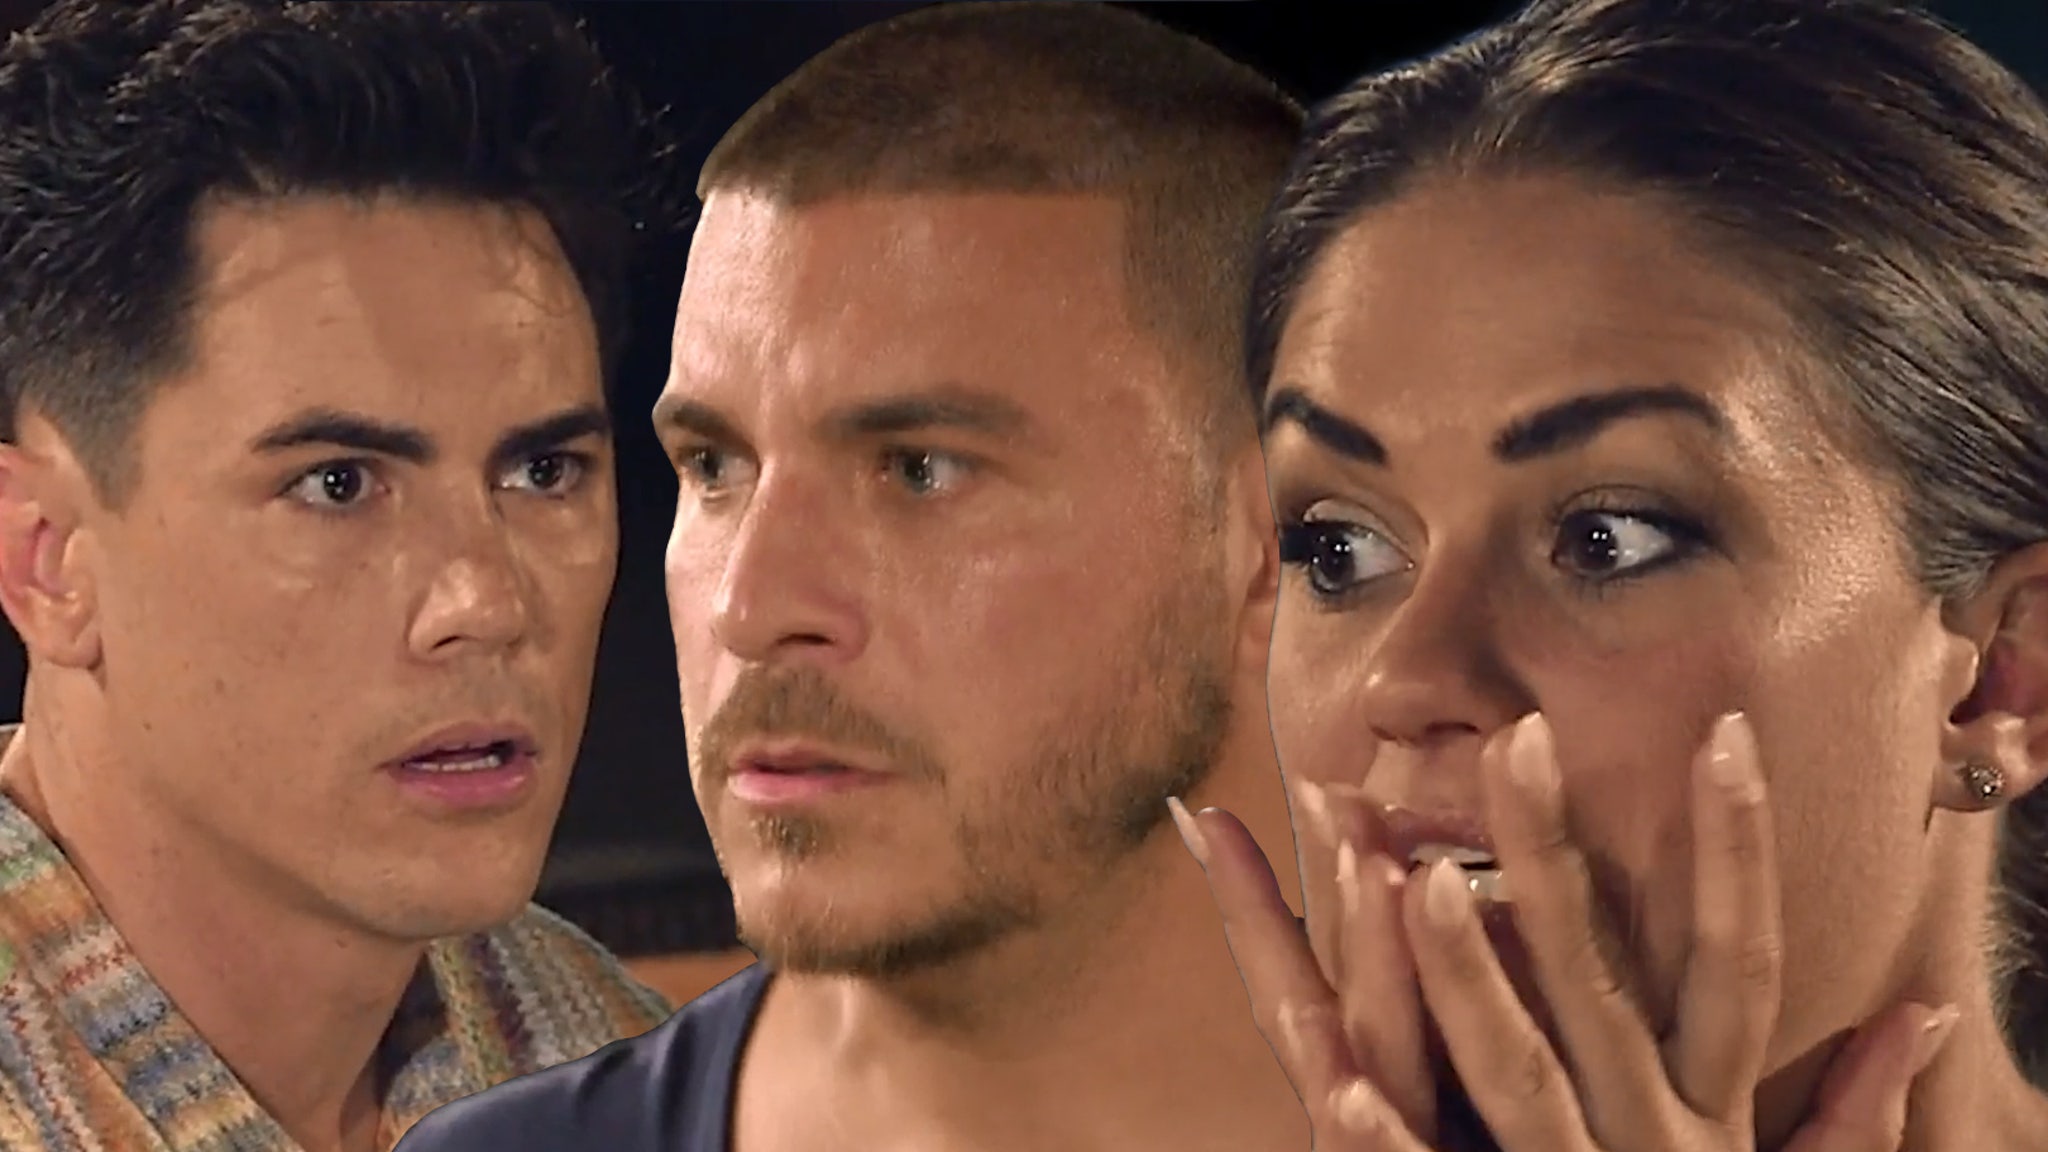 Vanderpump Rules Girls Gang Up On Jax Taylor During Screaming Match In Mexico 